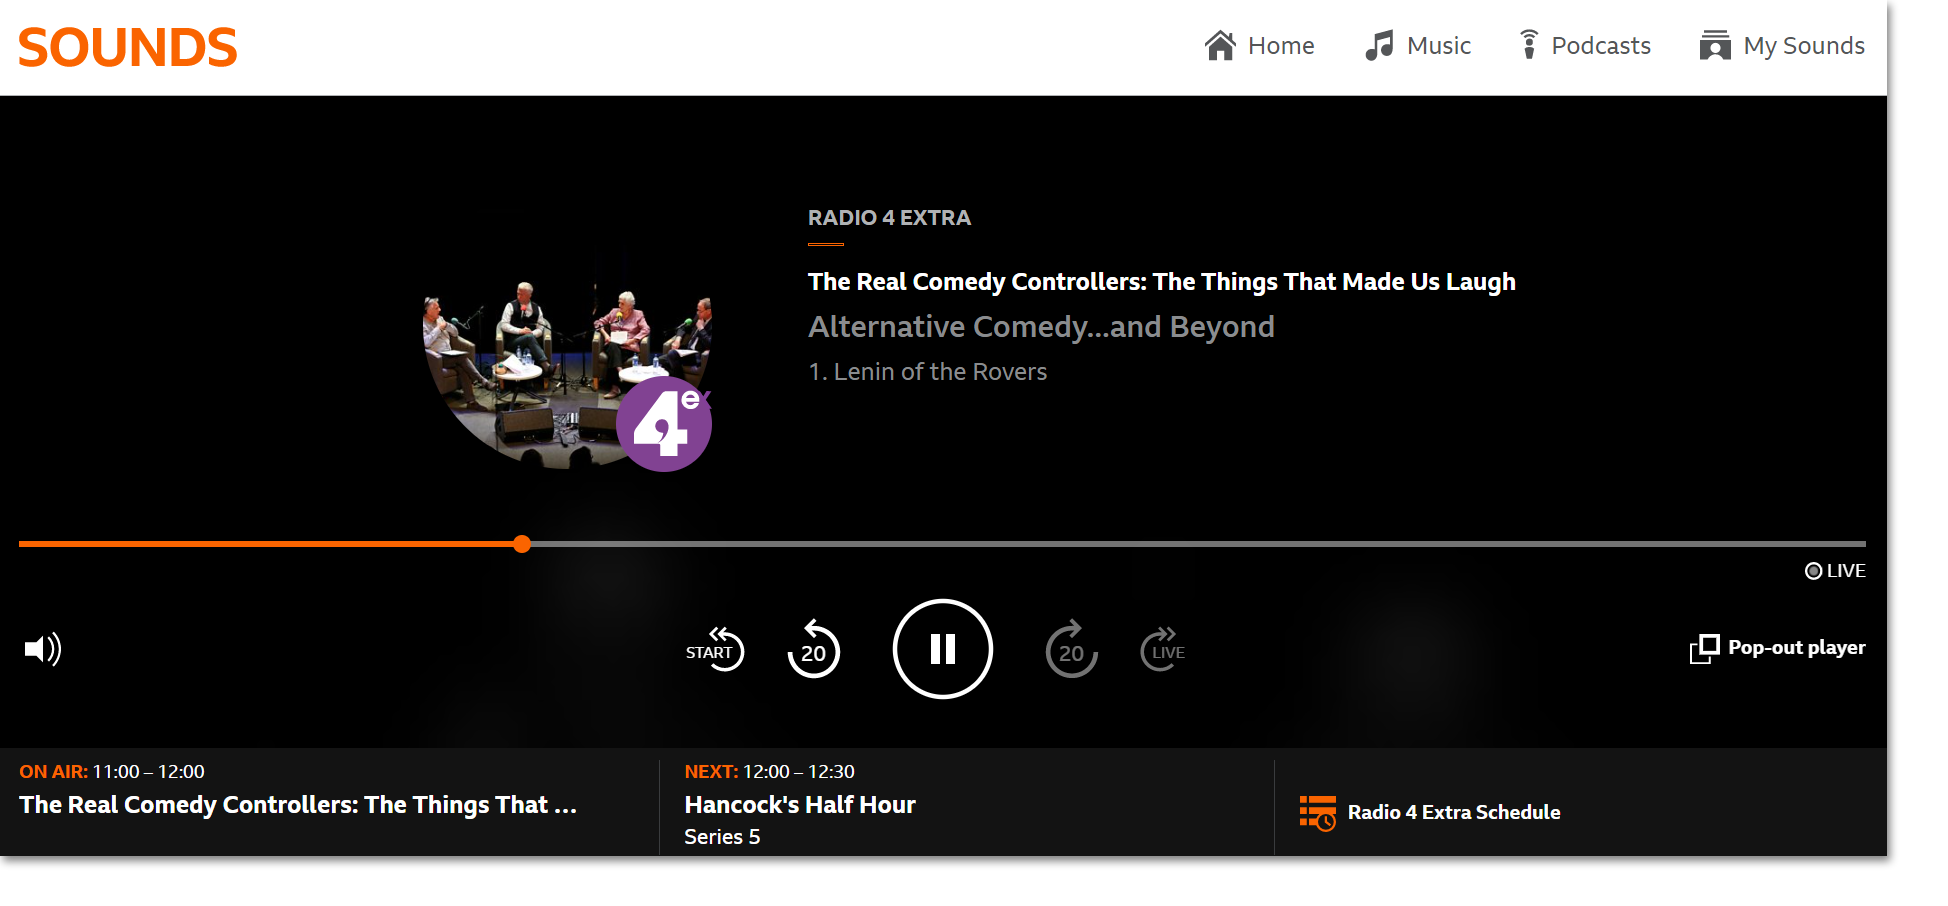 Image showing the playback screen on the BBC Sounds website